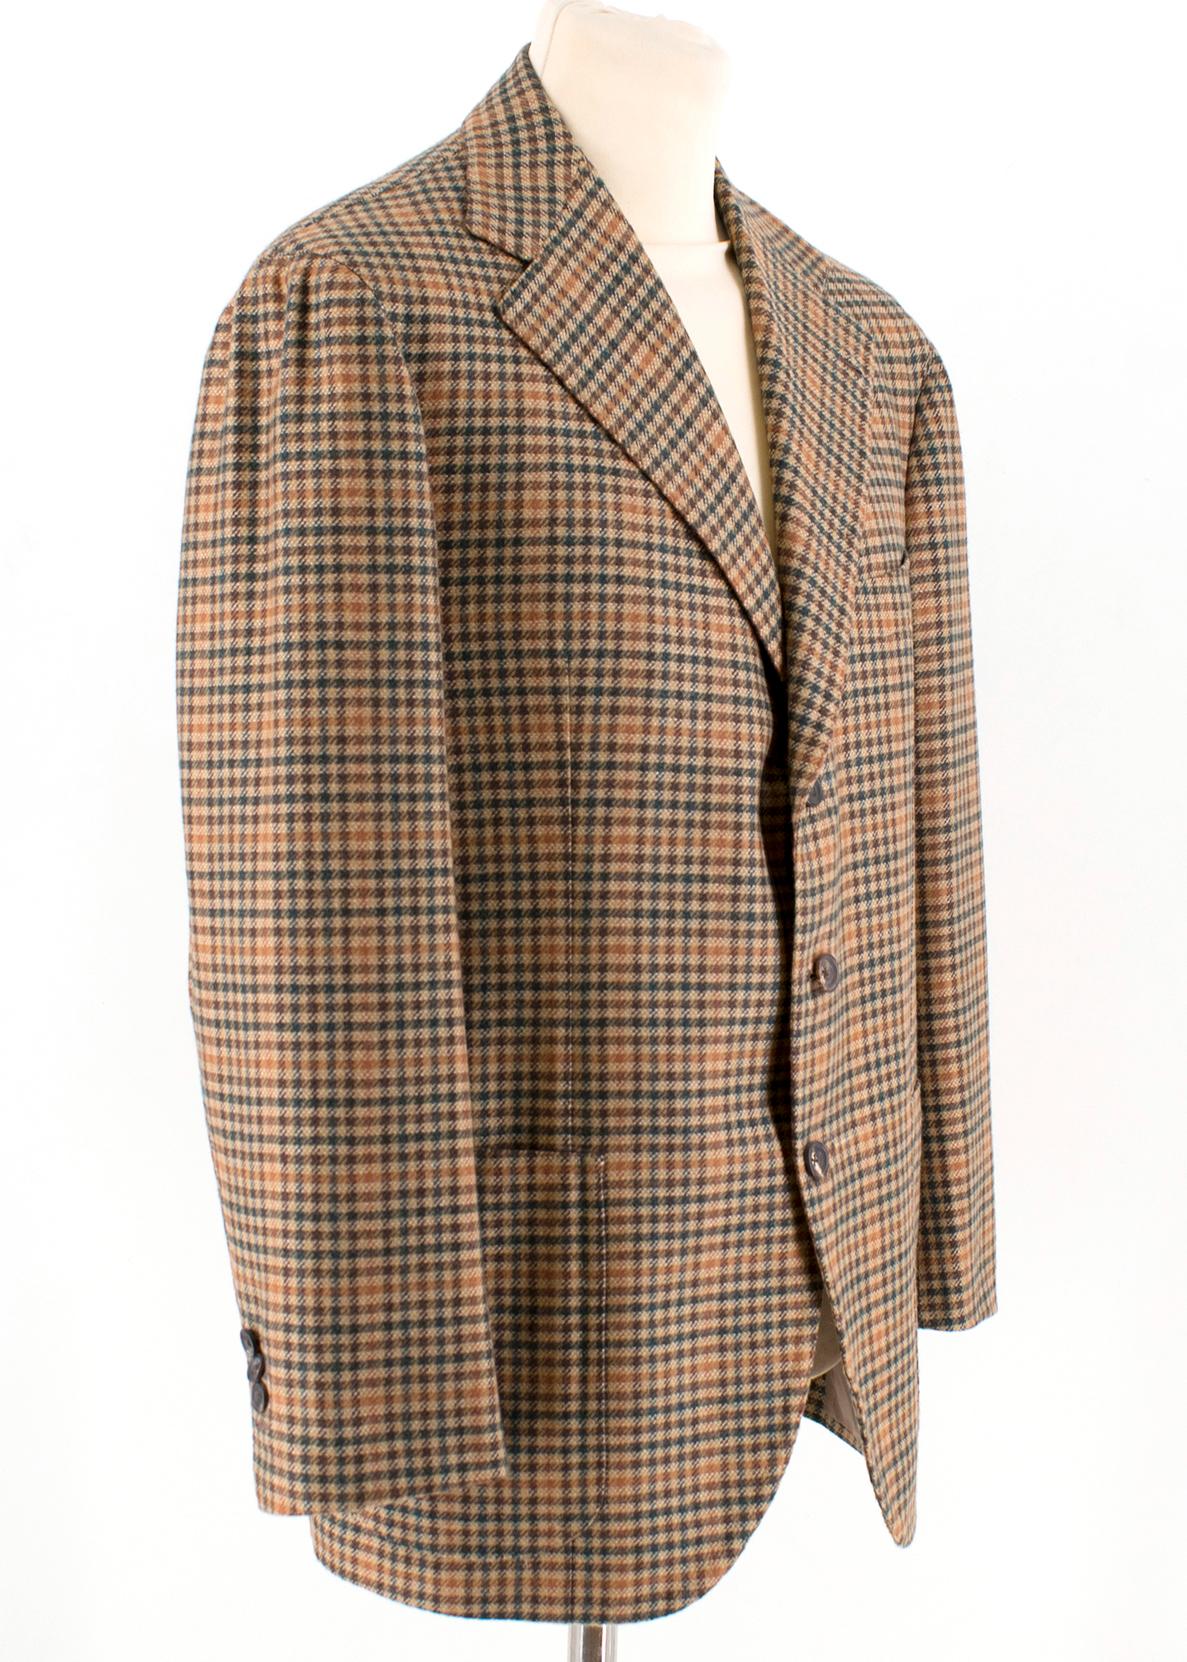 Gianni Volpe Brown Stripe Pattern Tweed Blazer Jacket

- This classic Gianni Volpe Blazer Jacket is an iconic piece of clothing from his collection 
- This single breasted blazer jacket features three button fastening, two front pockets, single